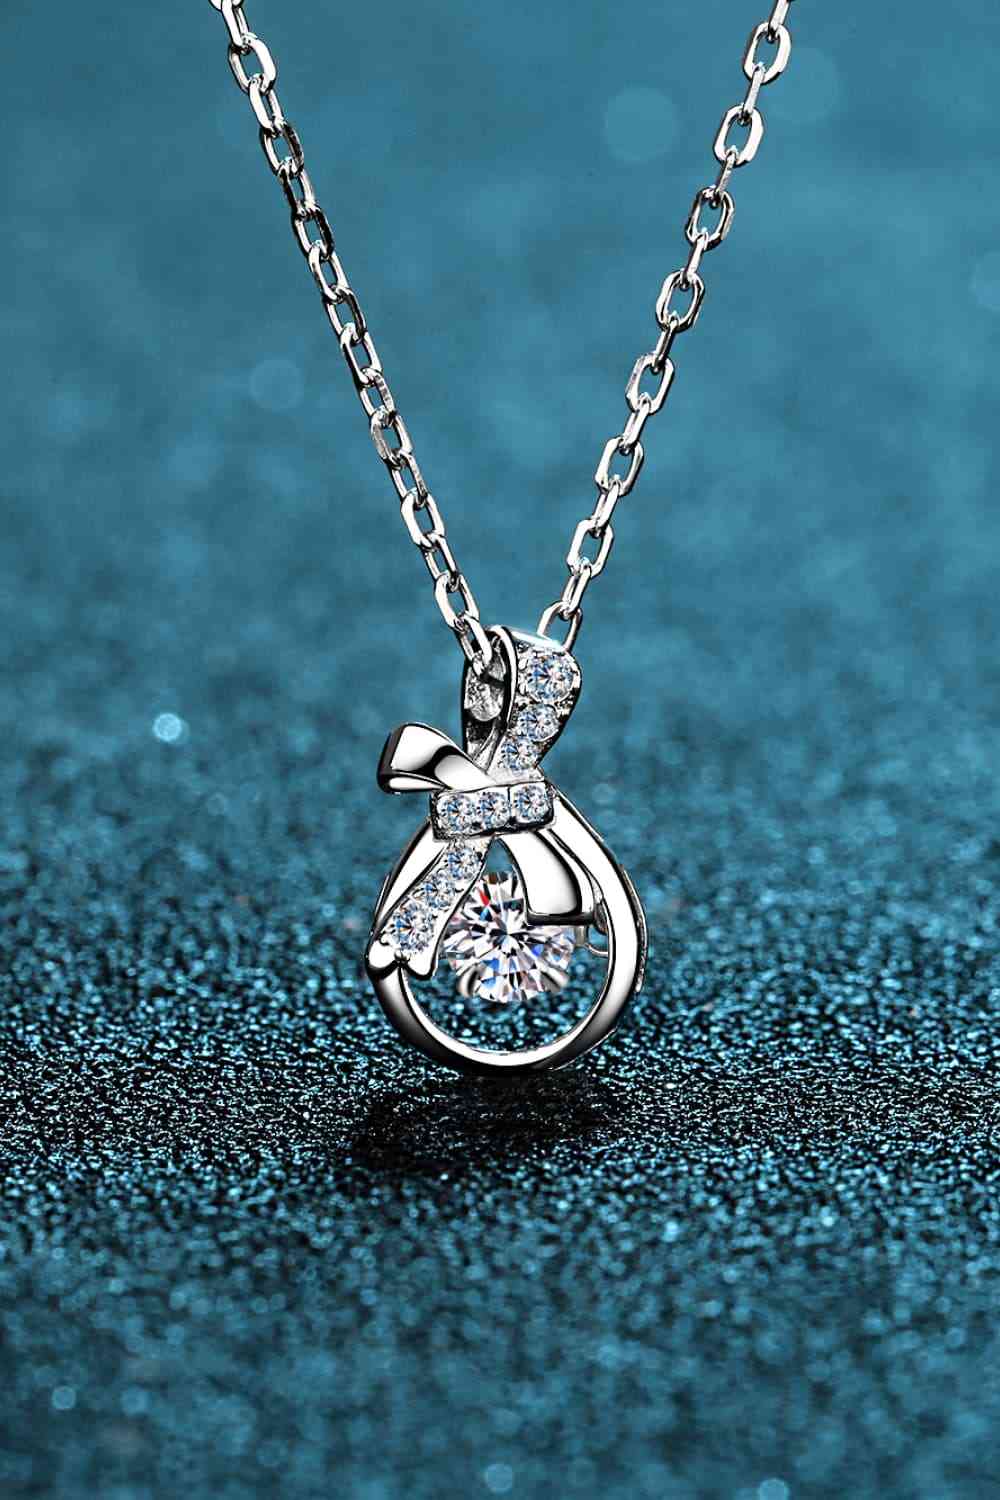 1 Carat Moissanite 925 Sterling Silver Necklace - Kawaii Stop - 1 Carat, Certificate Included, Christmas, DY-N, Elegance, Gift for Her, Imported, Luxury, Moissanite Necklace, Rhodium-Plated, Ship From Overseas, Statement Piece, Sterling Silver Jewelry, Women's Fashion, Zircon Accent